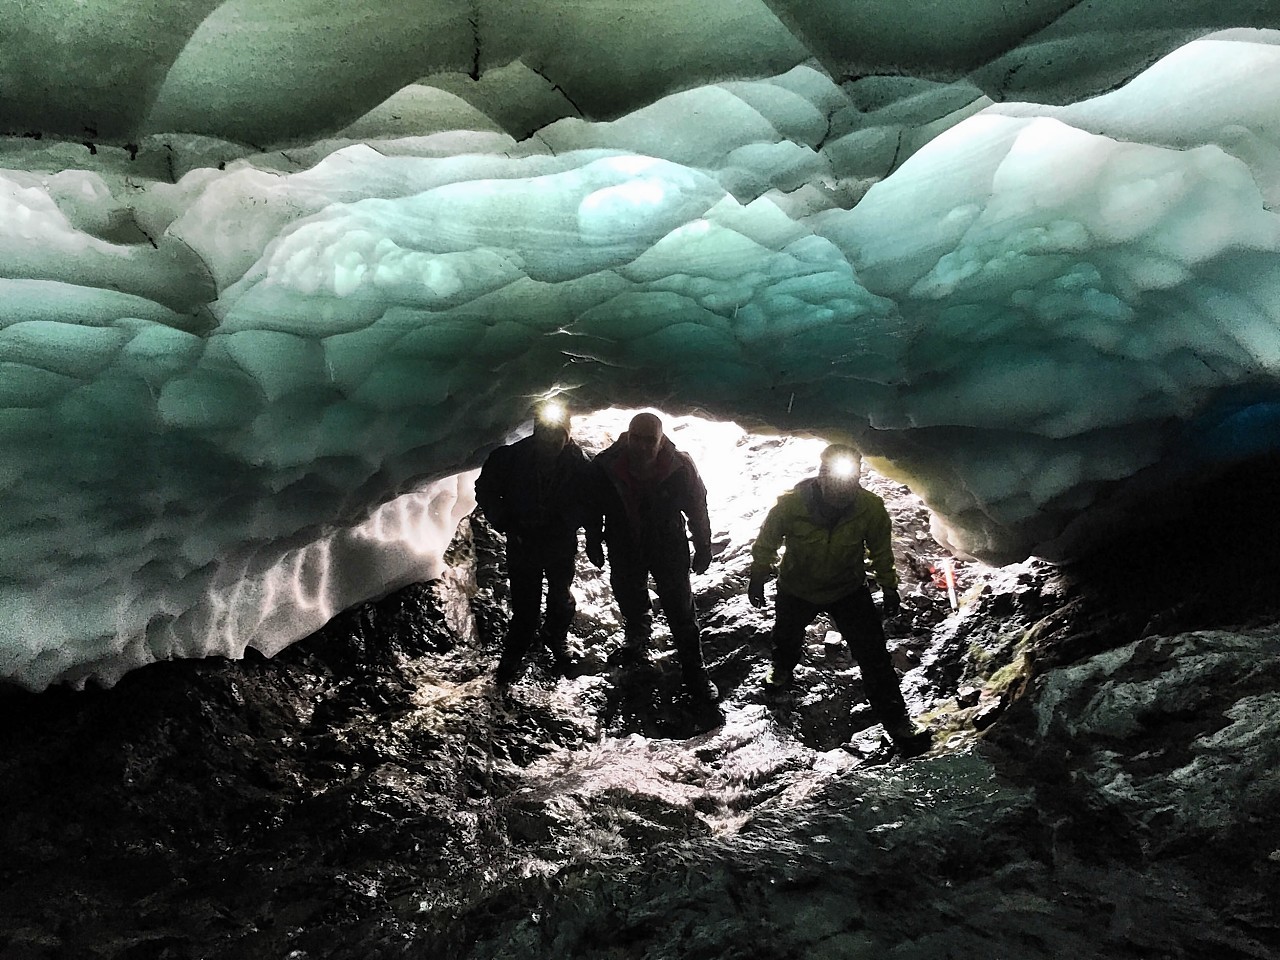 The pictures show summer snow caves clinging to the slopes of Ben Nevis 